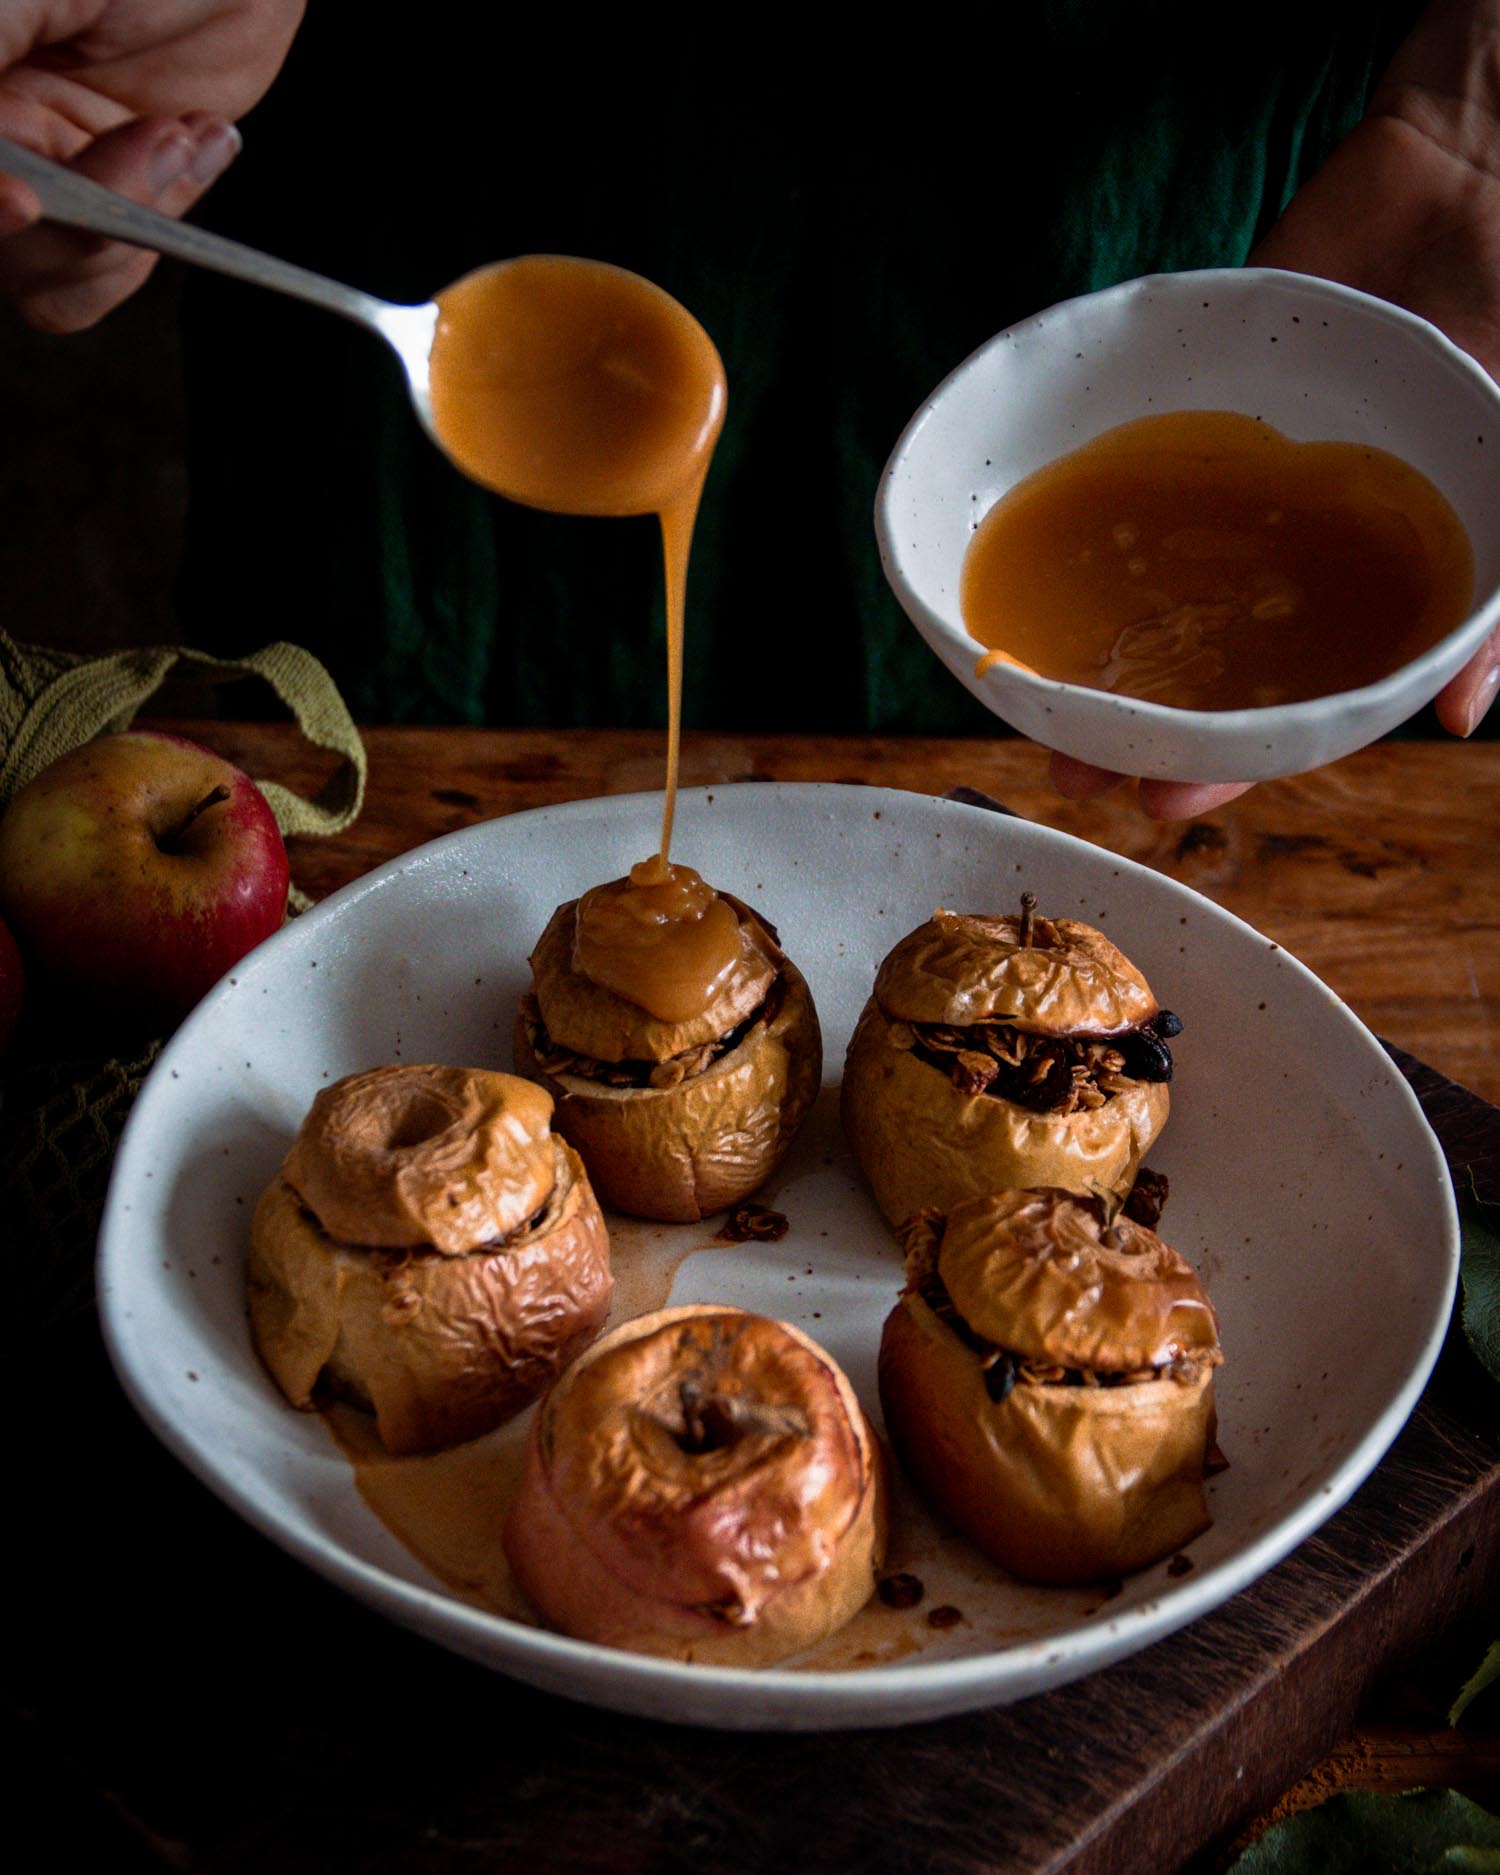 Apples baked in a Winterwares family bowl, with caramel sauce drizzled on top